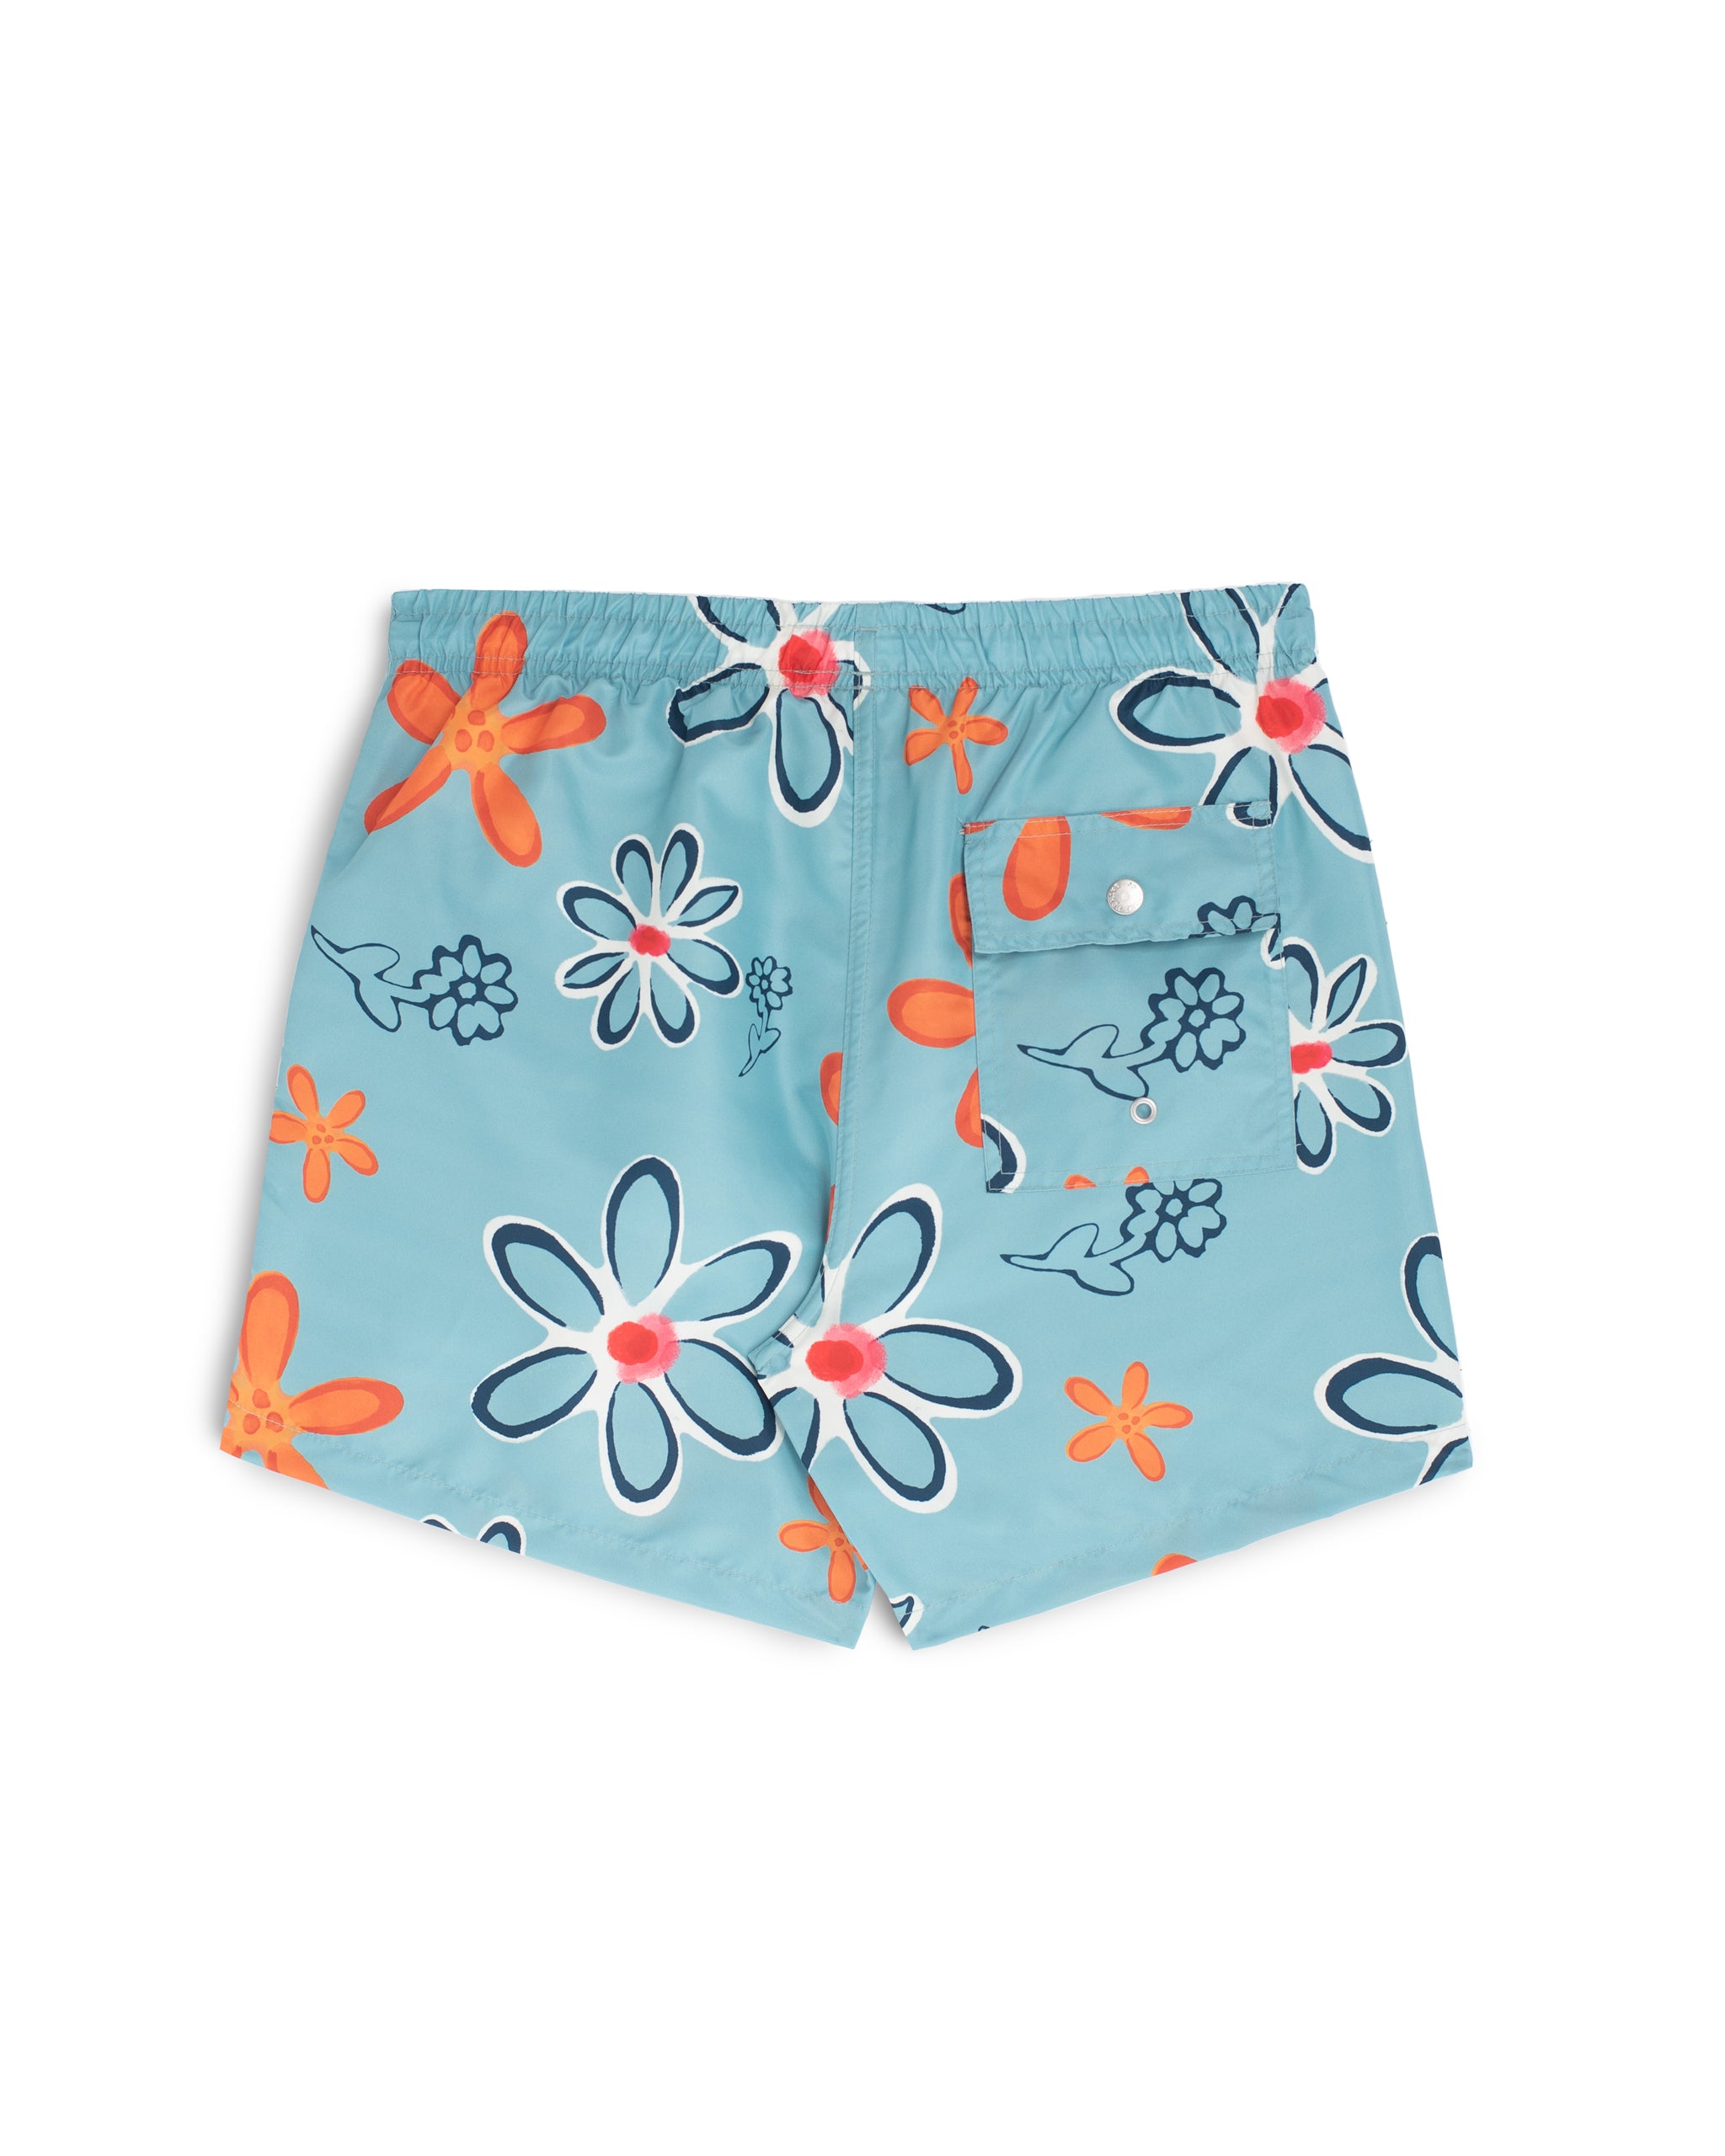 Back view of Blue Bather swim trunk with floral pattern and orange flowers